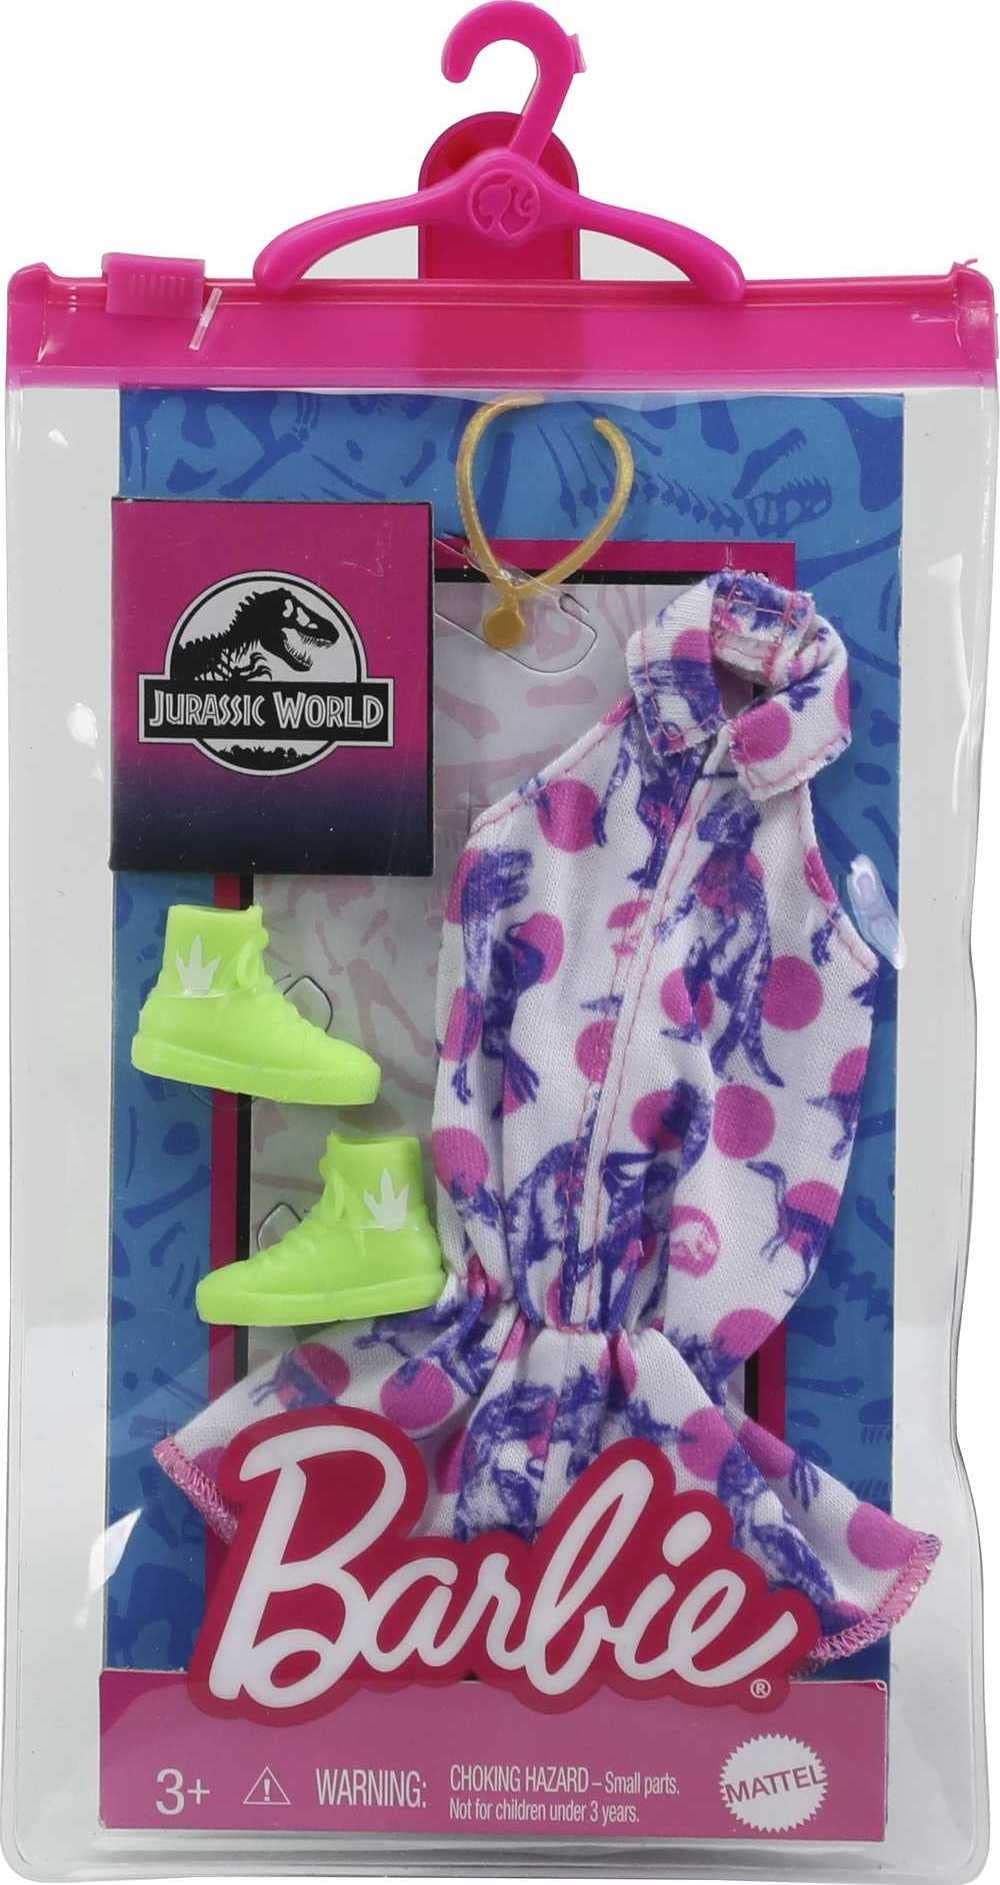 Barbie Fashions Complete Looks 1 of Doll Clothes Inspired by Popular Brand Roxy, Complete Look with Outfit & Accessories for Barbie Dolls, Gift for Kids 3 to 8 Years Old